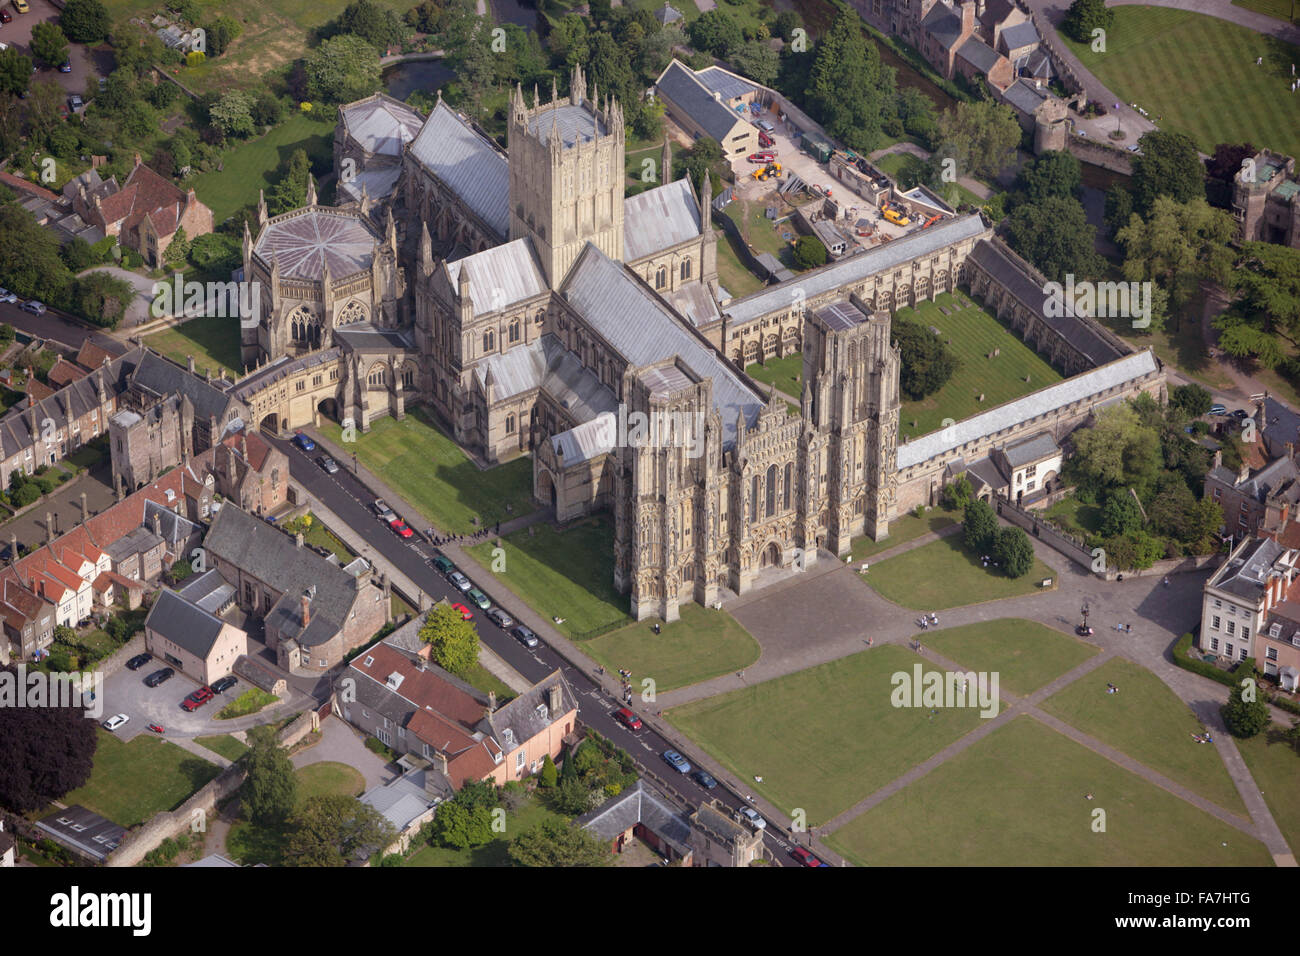 WELLS CATHEDRAL, Somerset. Seat of the Bishop of Bath and Wells, the cathedral is substantially in the Early English style typical of the late 12th and early 13th centuries. This aerial view is from June 2006. Stock Photo